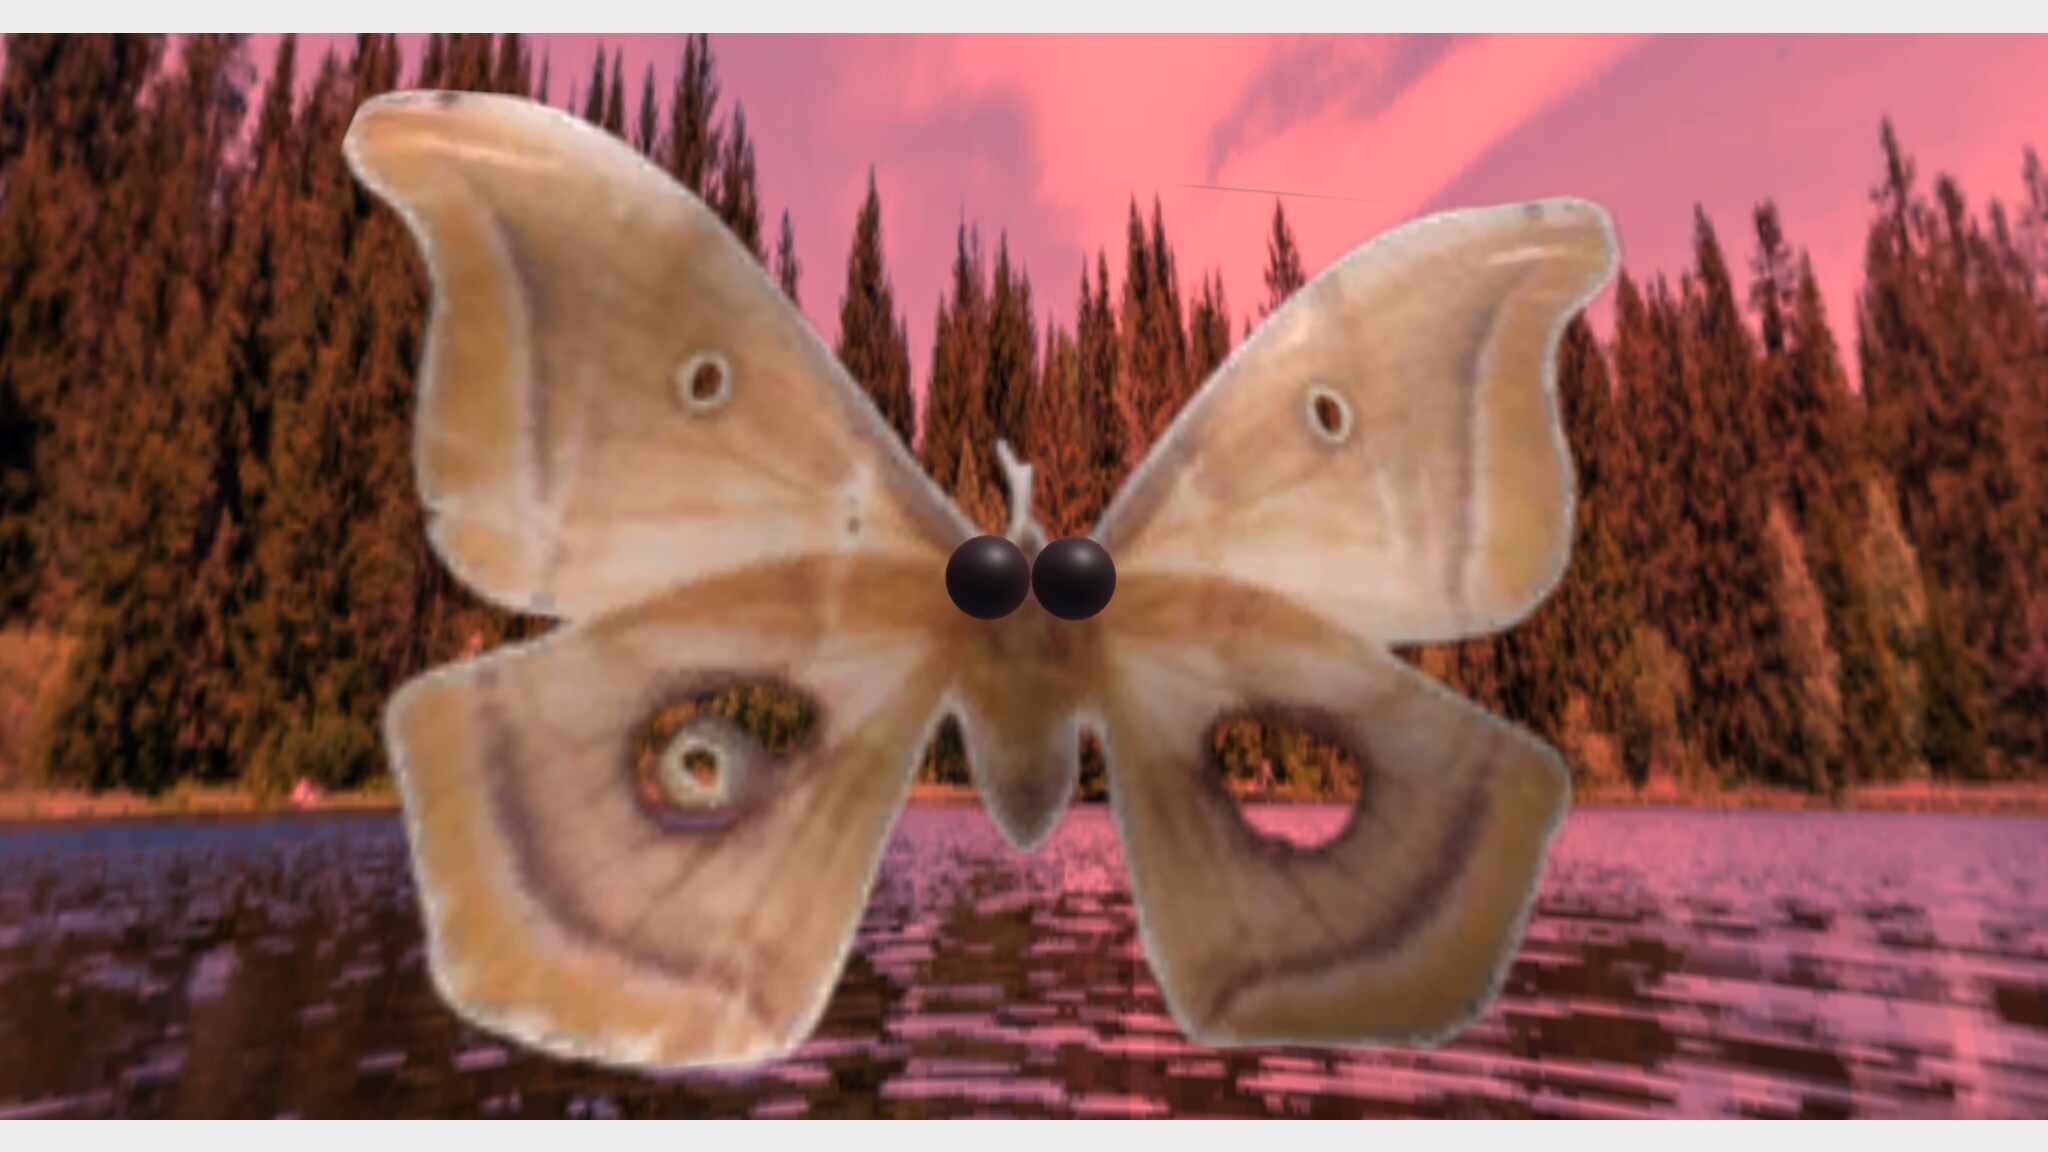 Moththerapy